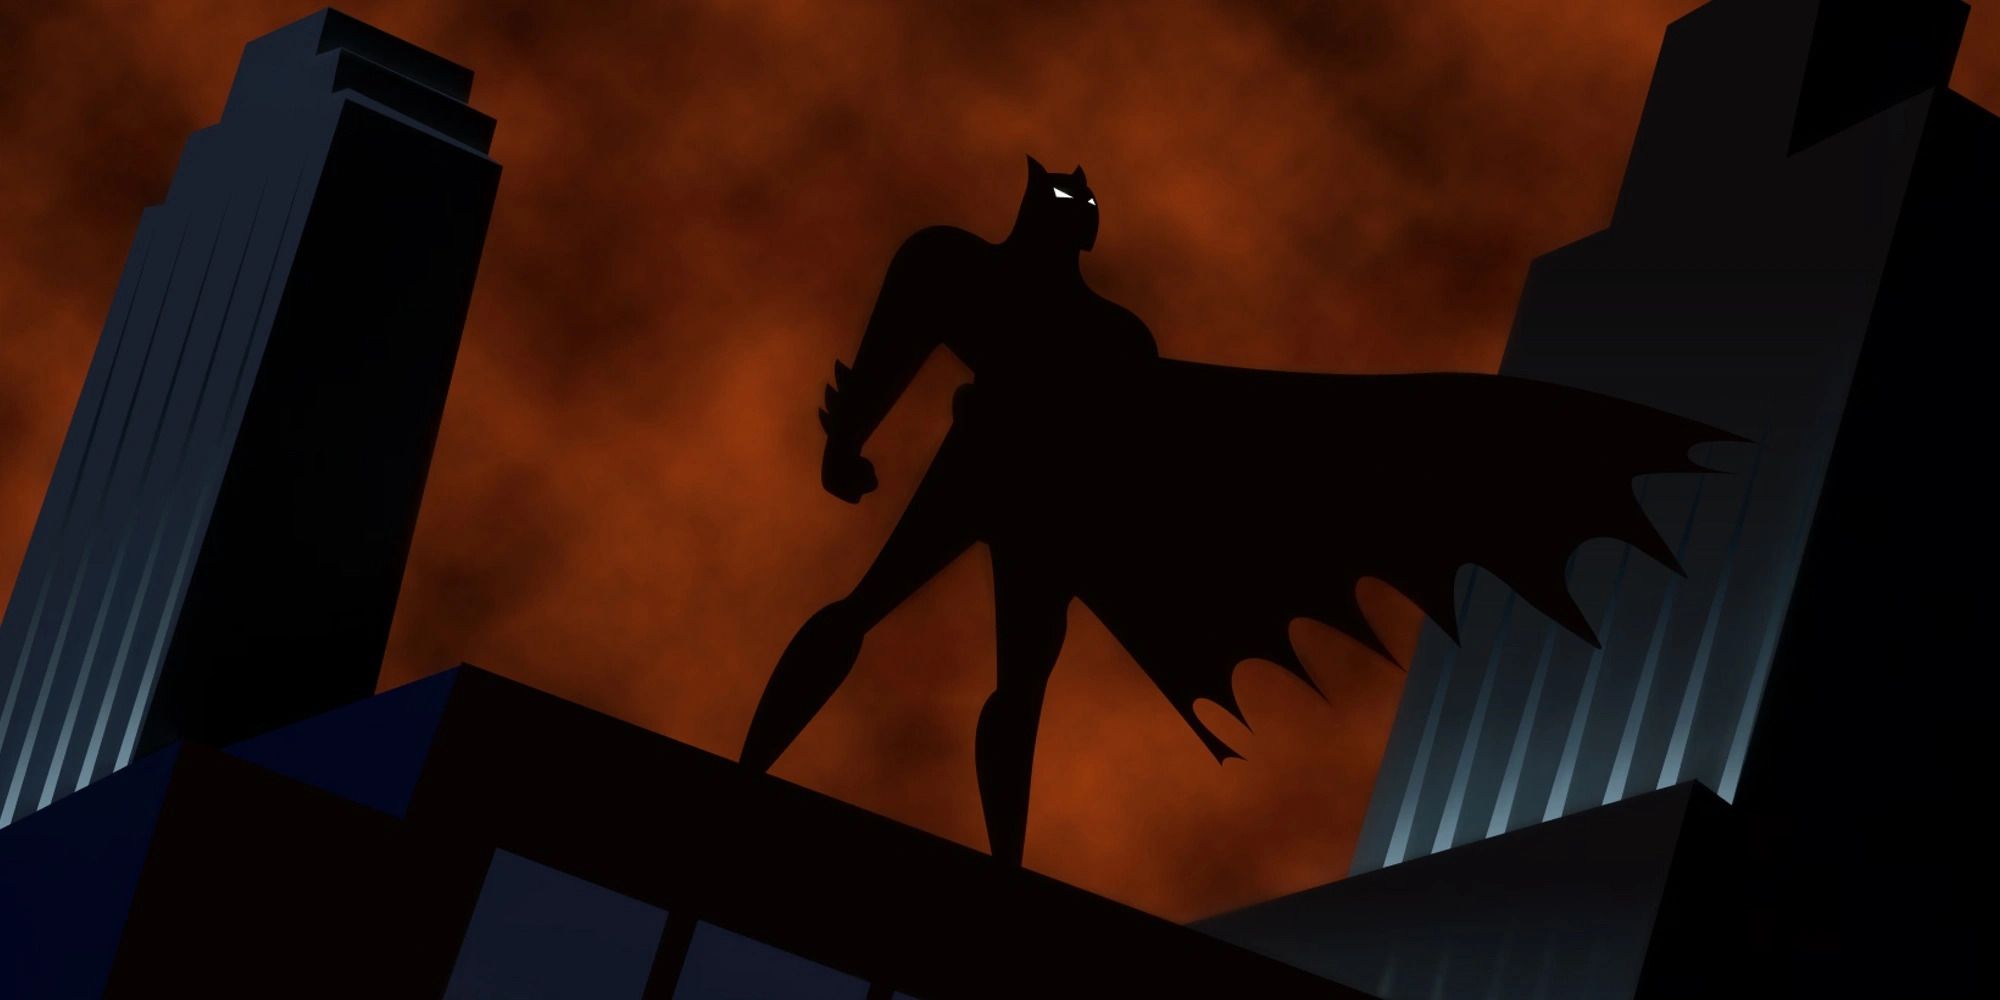 Batman on a rooftop in silhouette from the opening of 